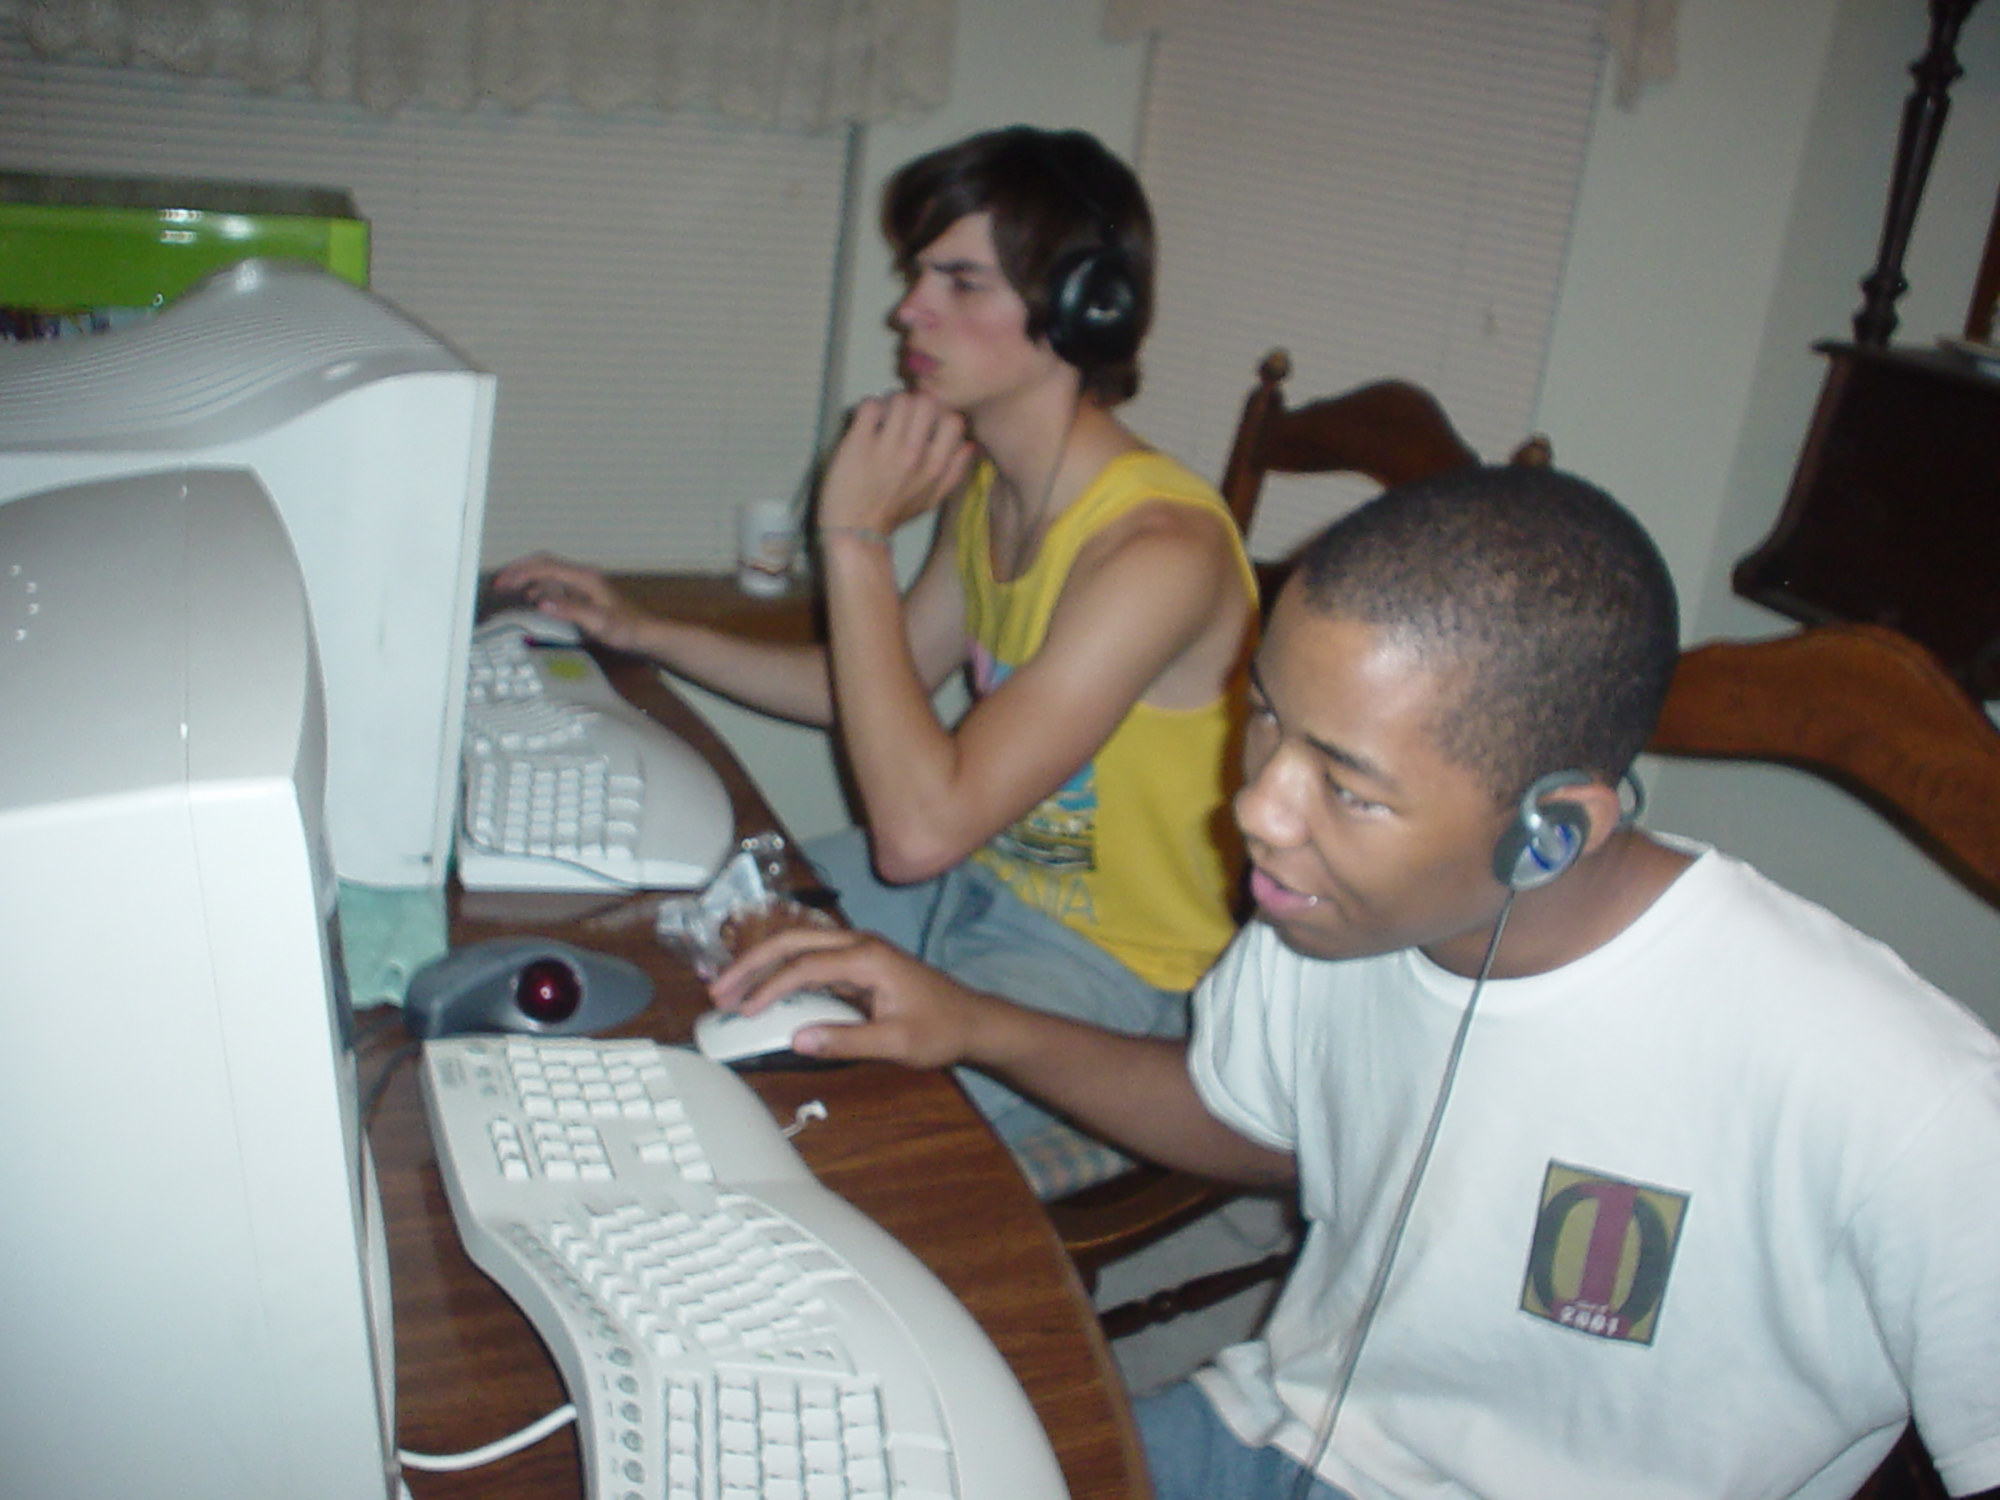 An image of people at a LAN party.